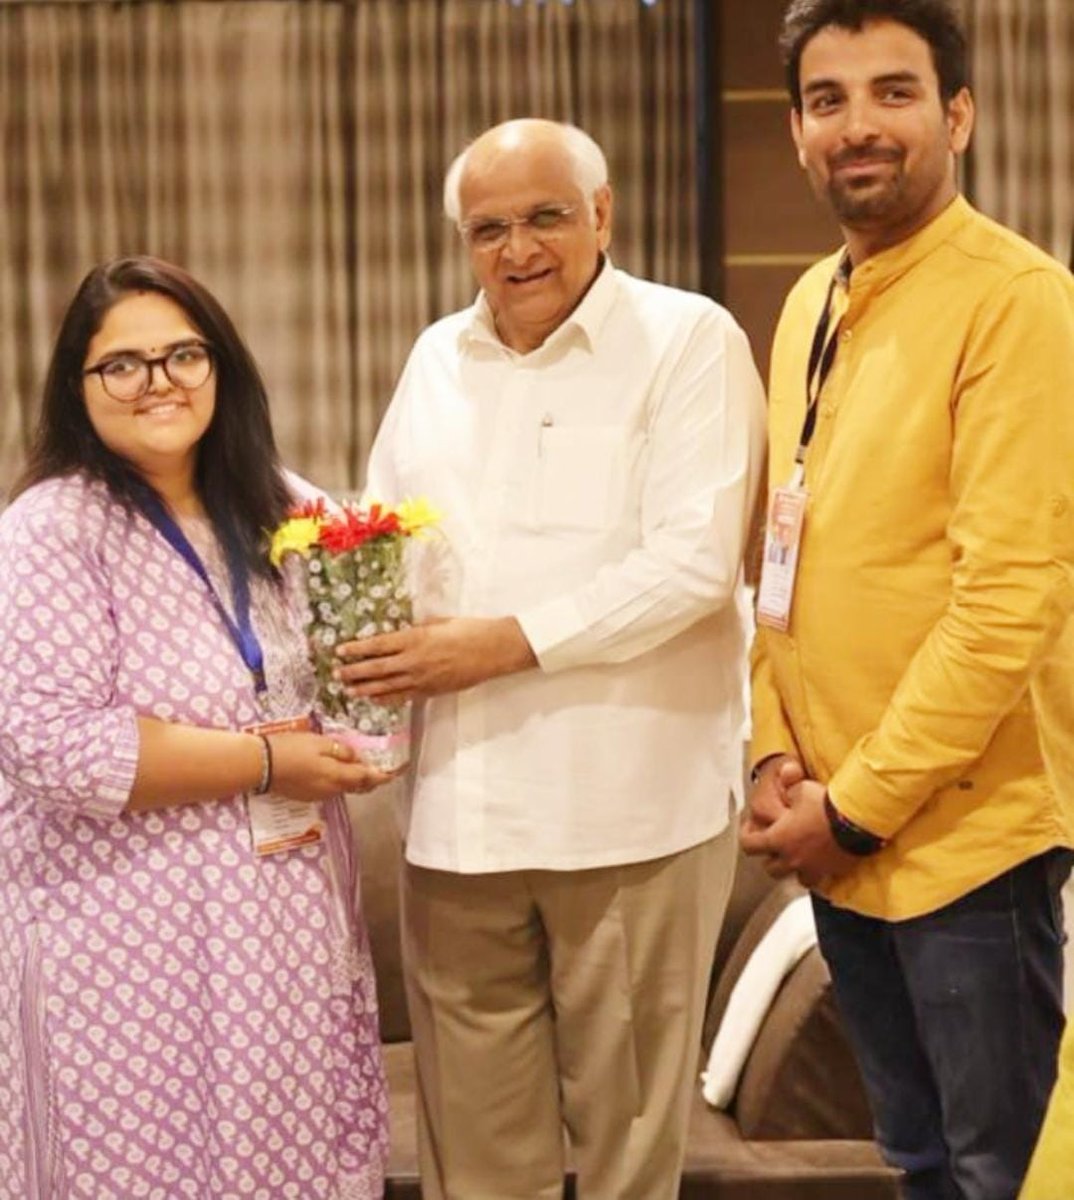 A meeting with The CM of Garvi Gujarat state shri @Bhupendrapbjp ji , the way he intracts with people is just awesome and his simplicity says everything. A proud moment for us. ❤️ @imonikaudeshi